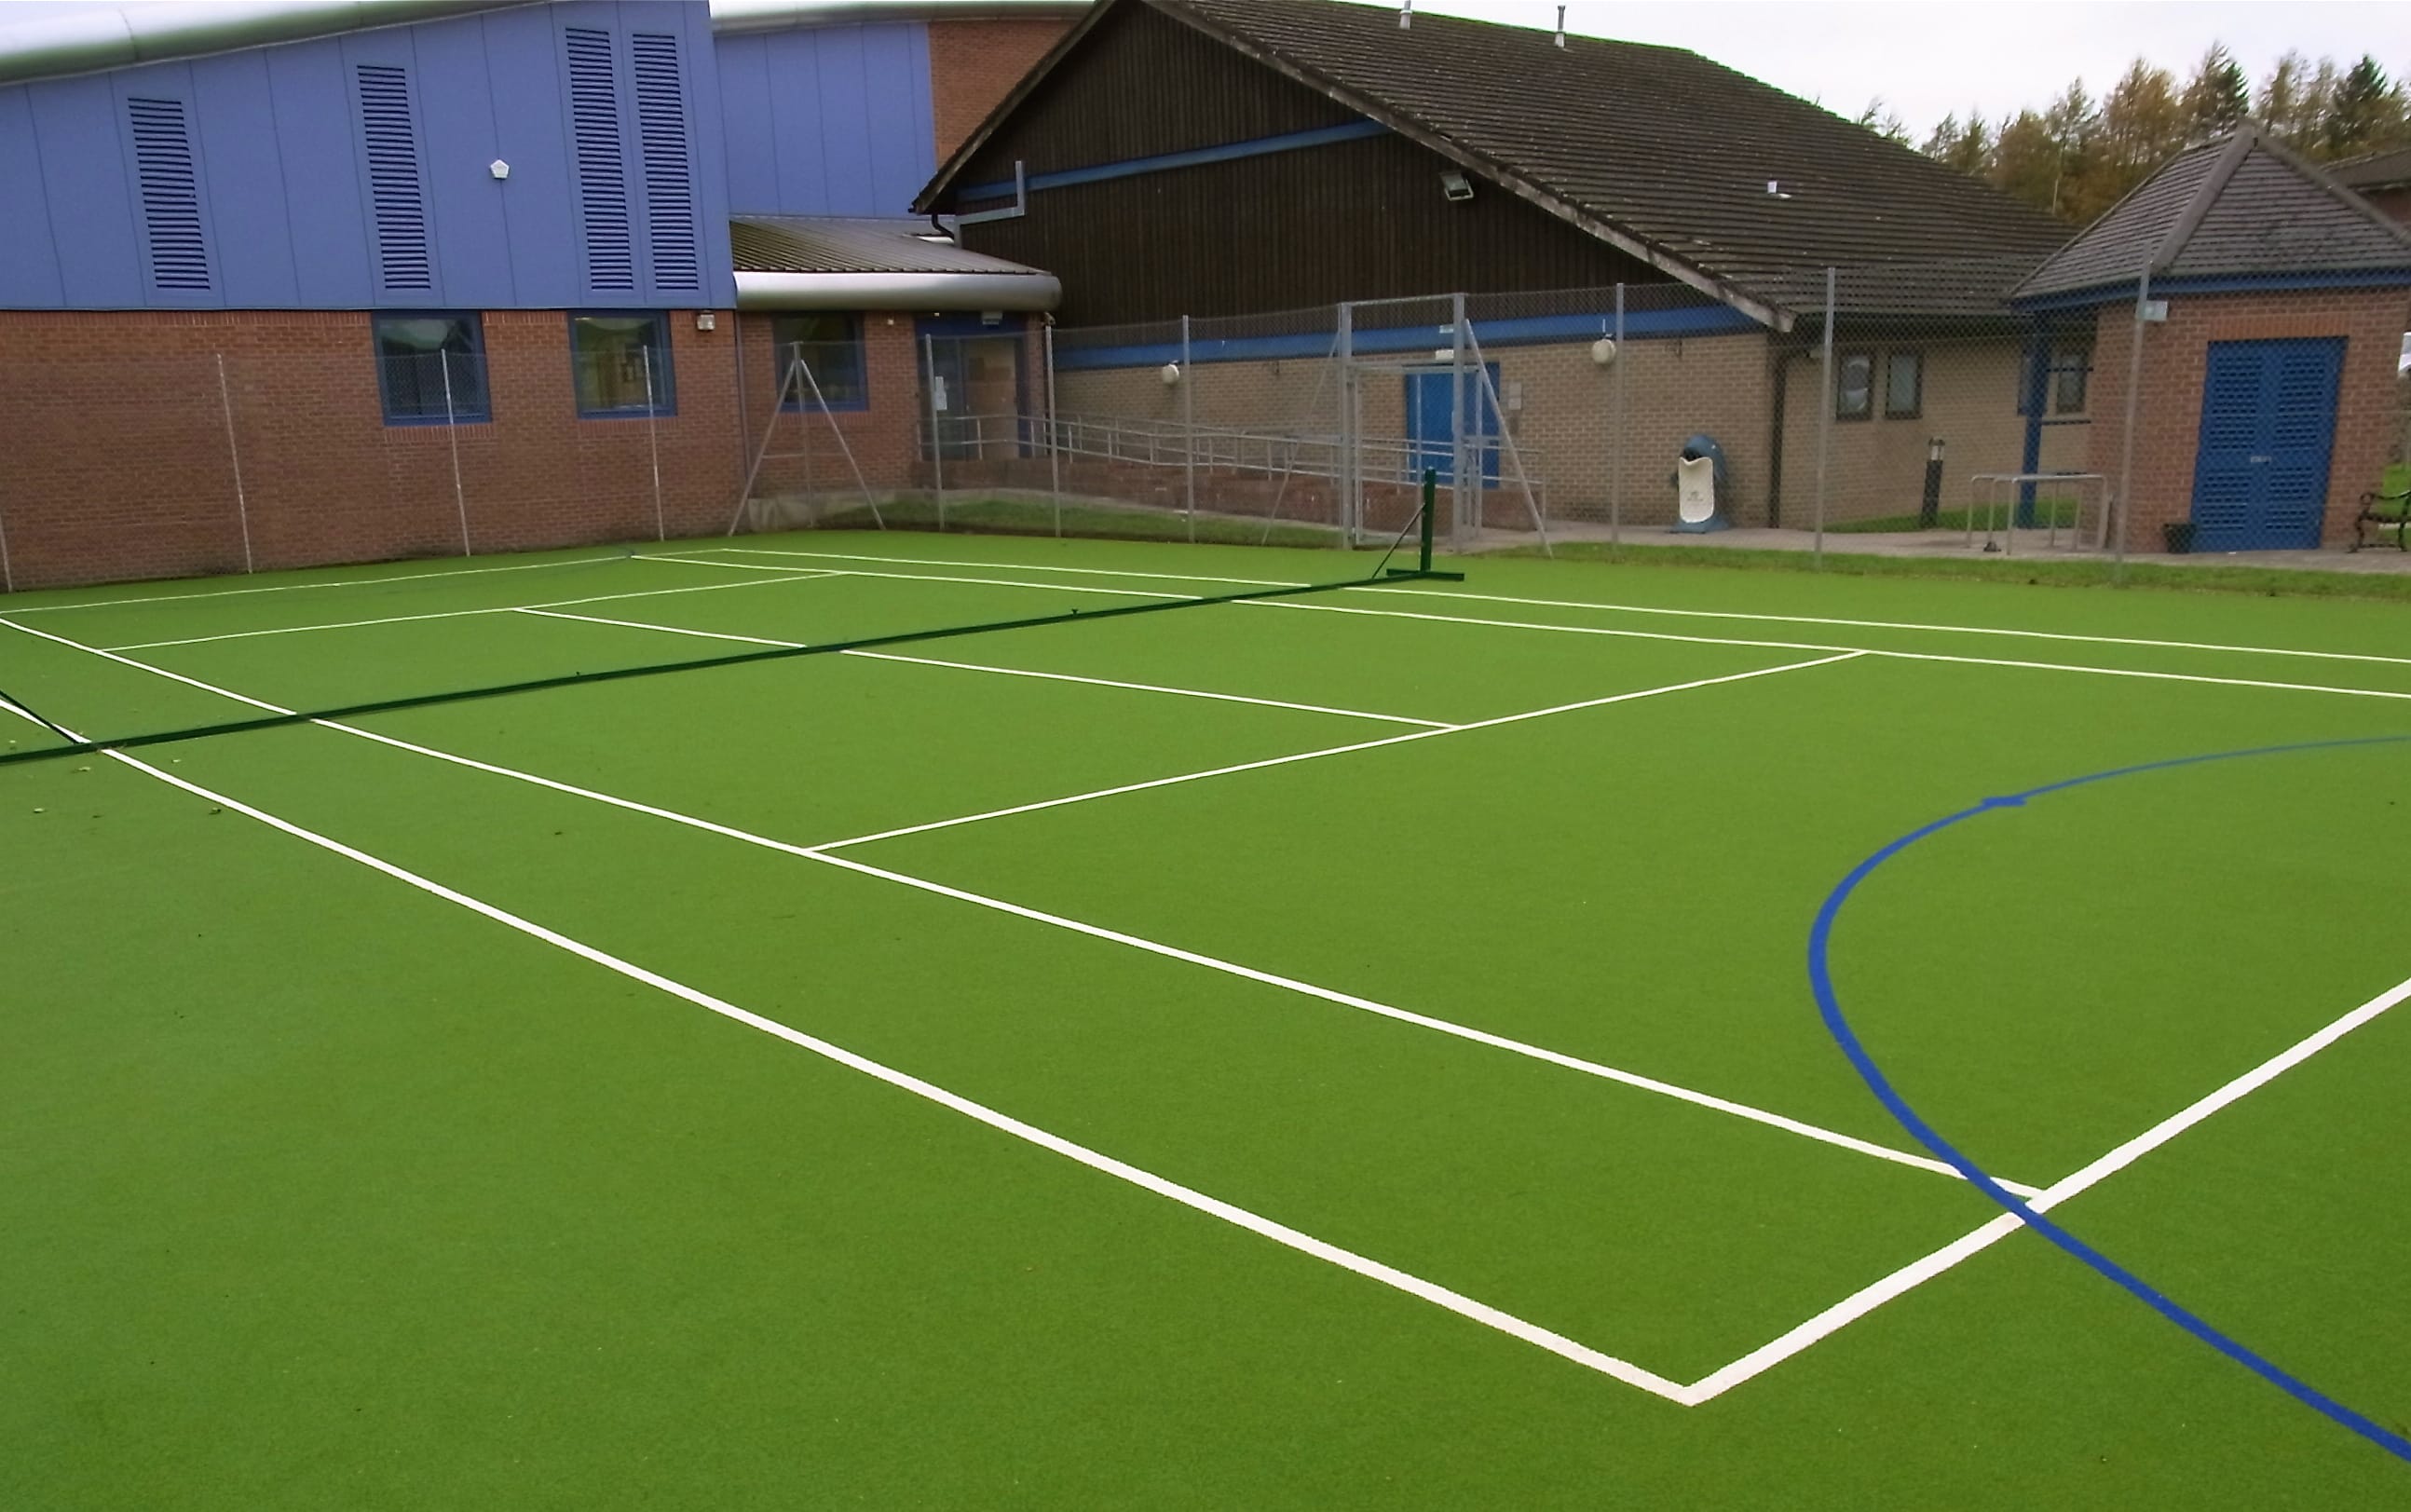 muga being used as a tennis court